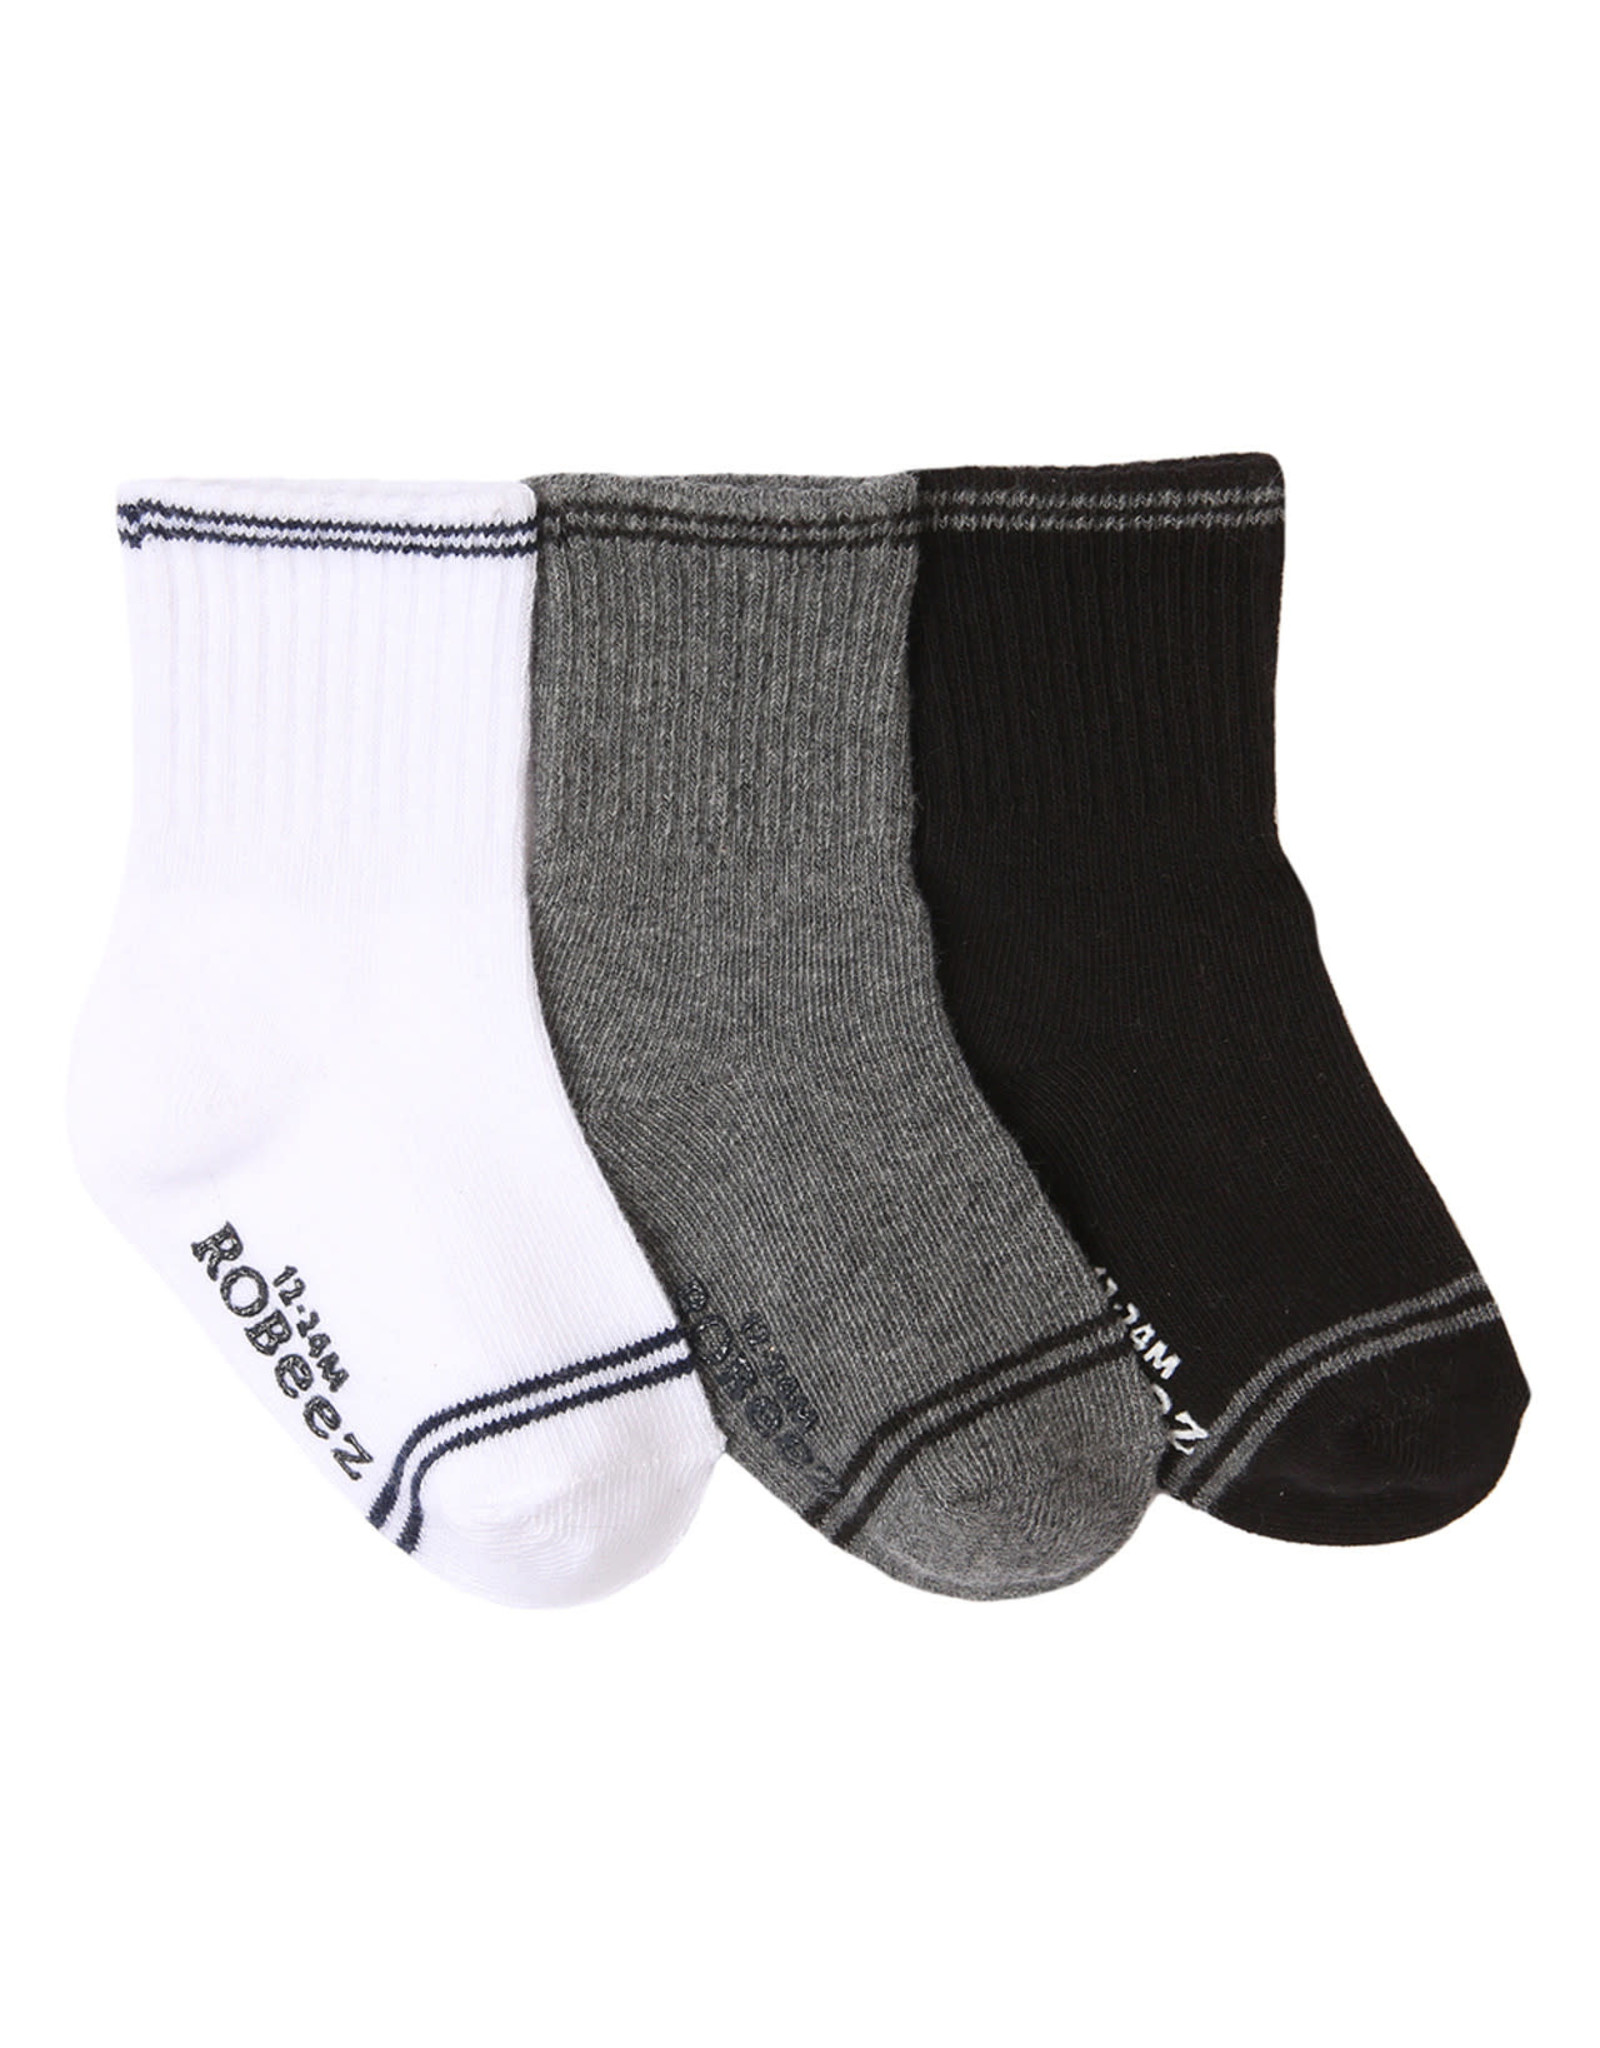 Robeez Goes with Everything Socks 3-Pack